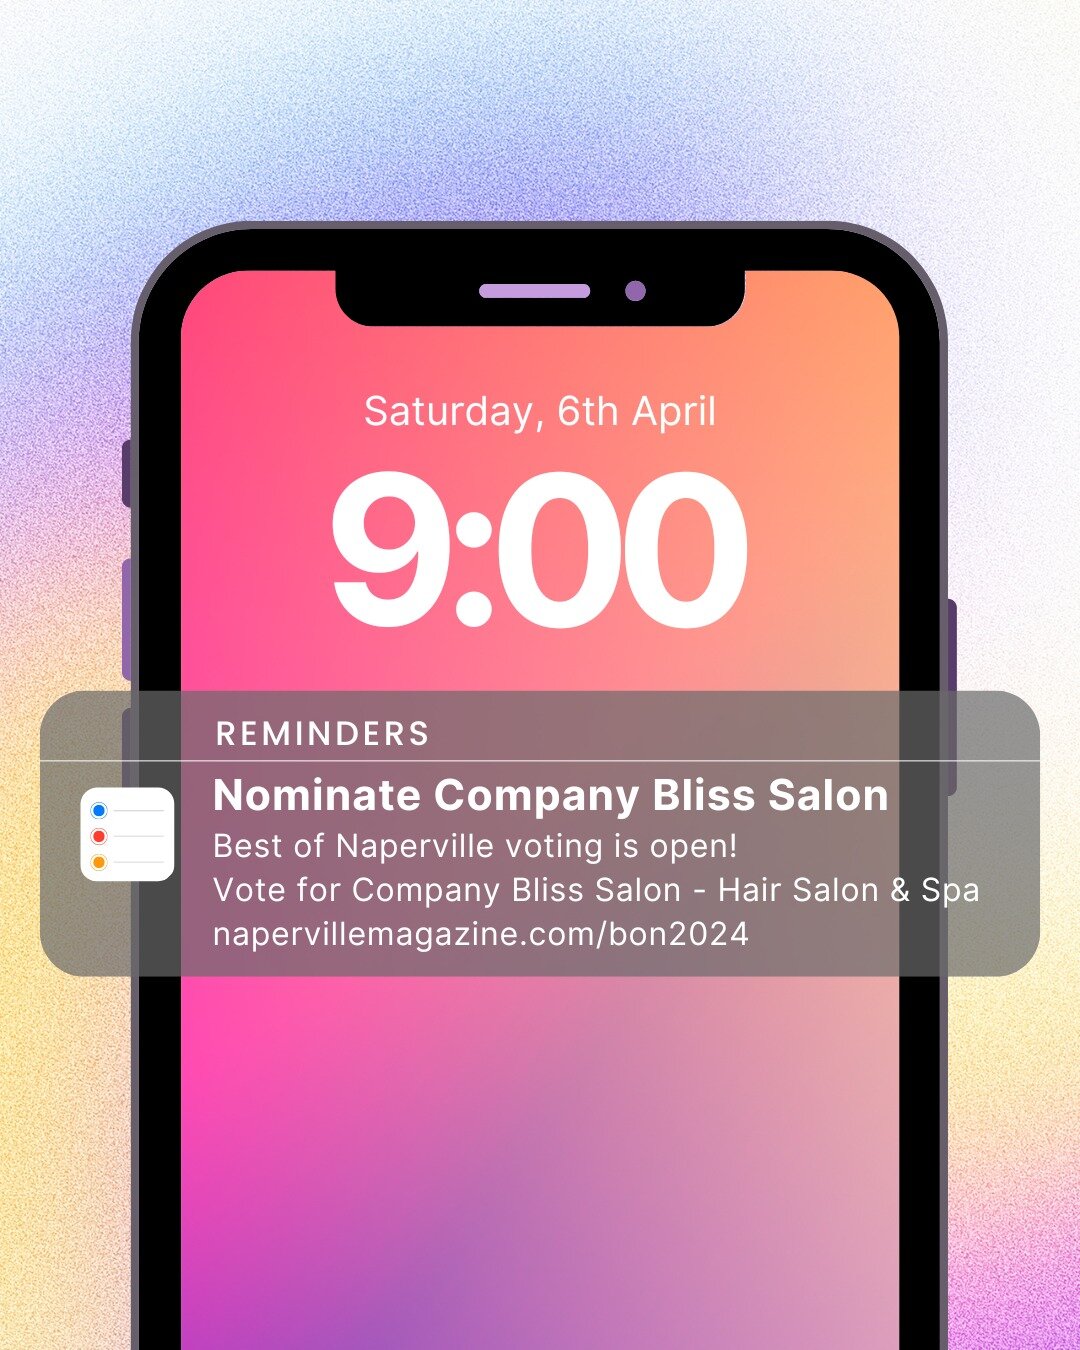 🌟✨ Help Us Shine as the Best of Naperville! 💖✨

We're eligible to be nominated for Best Hair Salon of Naperville and your support means the world to us. 

4 easy steps to nominate us:
1. Click the link in our bio that says &quot;Nominate us for Bes